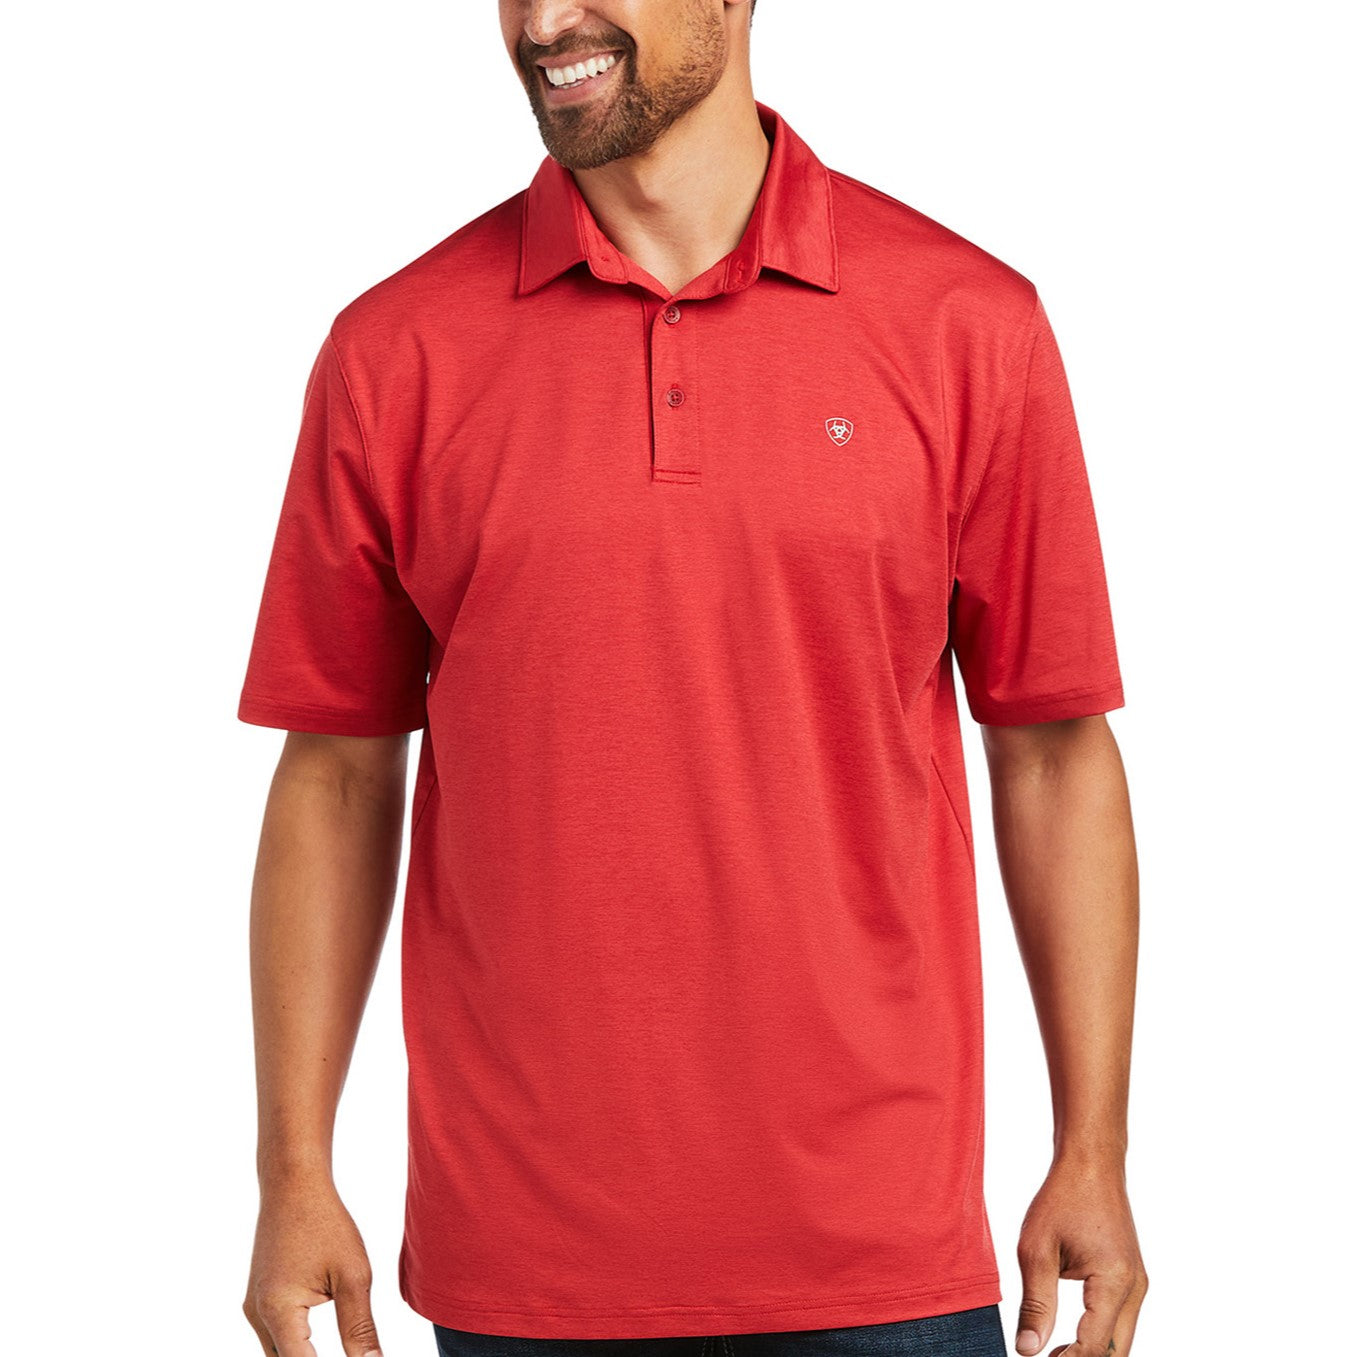 Ariat Men's Charger 2.0 Scooter Polo Short Sleeve T-Shirt 10039416